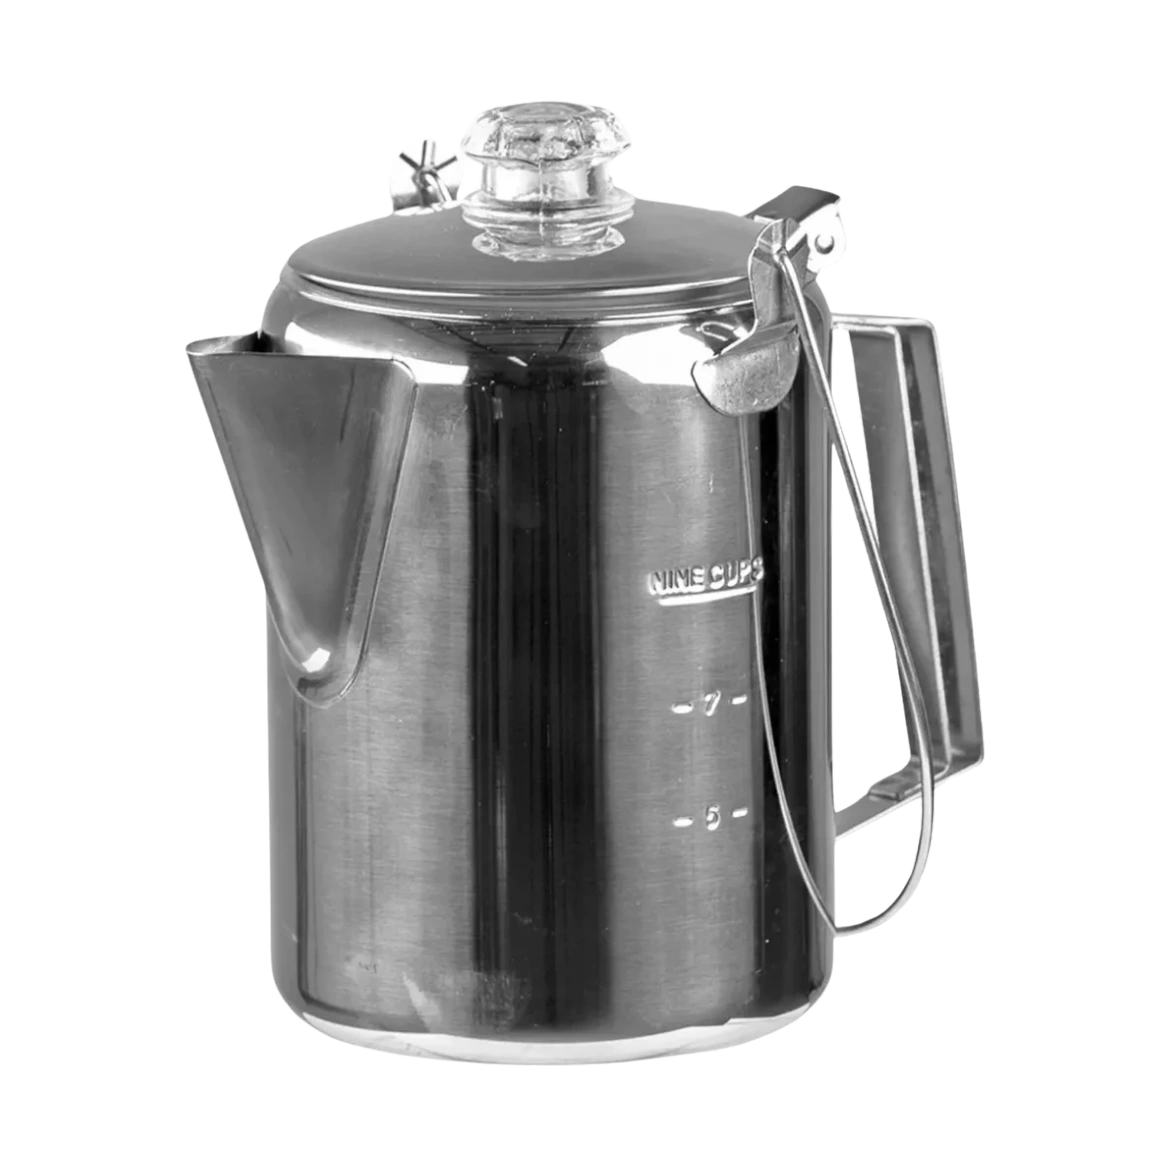 APOXCON Camping Coffee Percolator Pot 304 Stainless Steel for Coffee Making Outdoor Traveling Campfire Stovetop Fast Brew Kettle 9 Cups